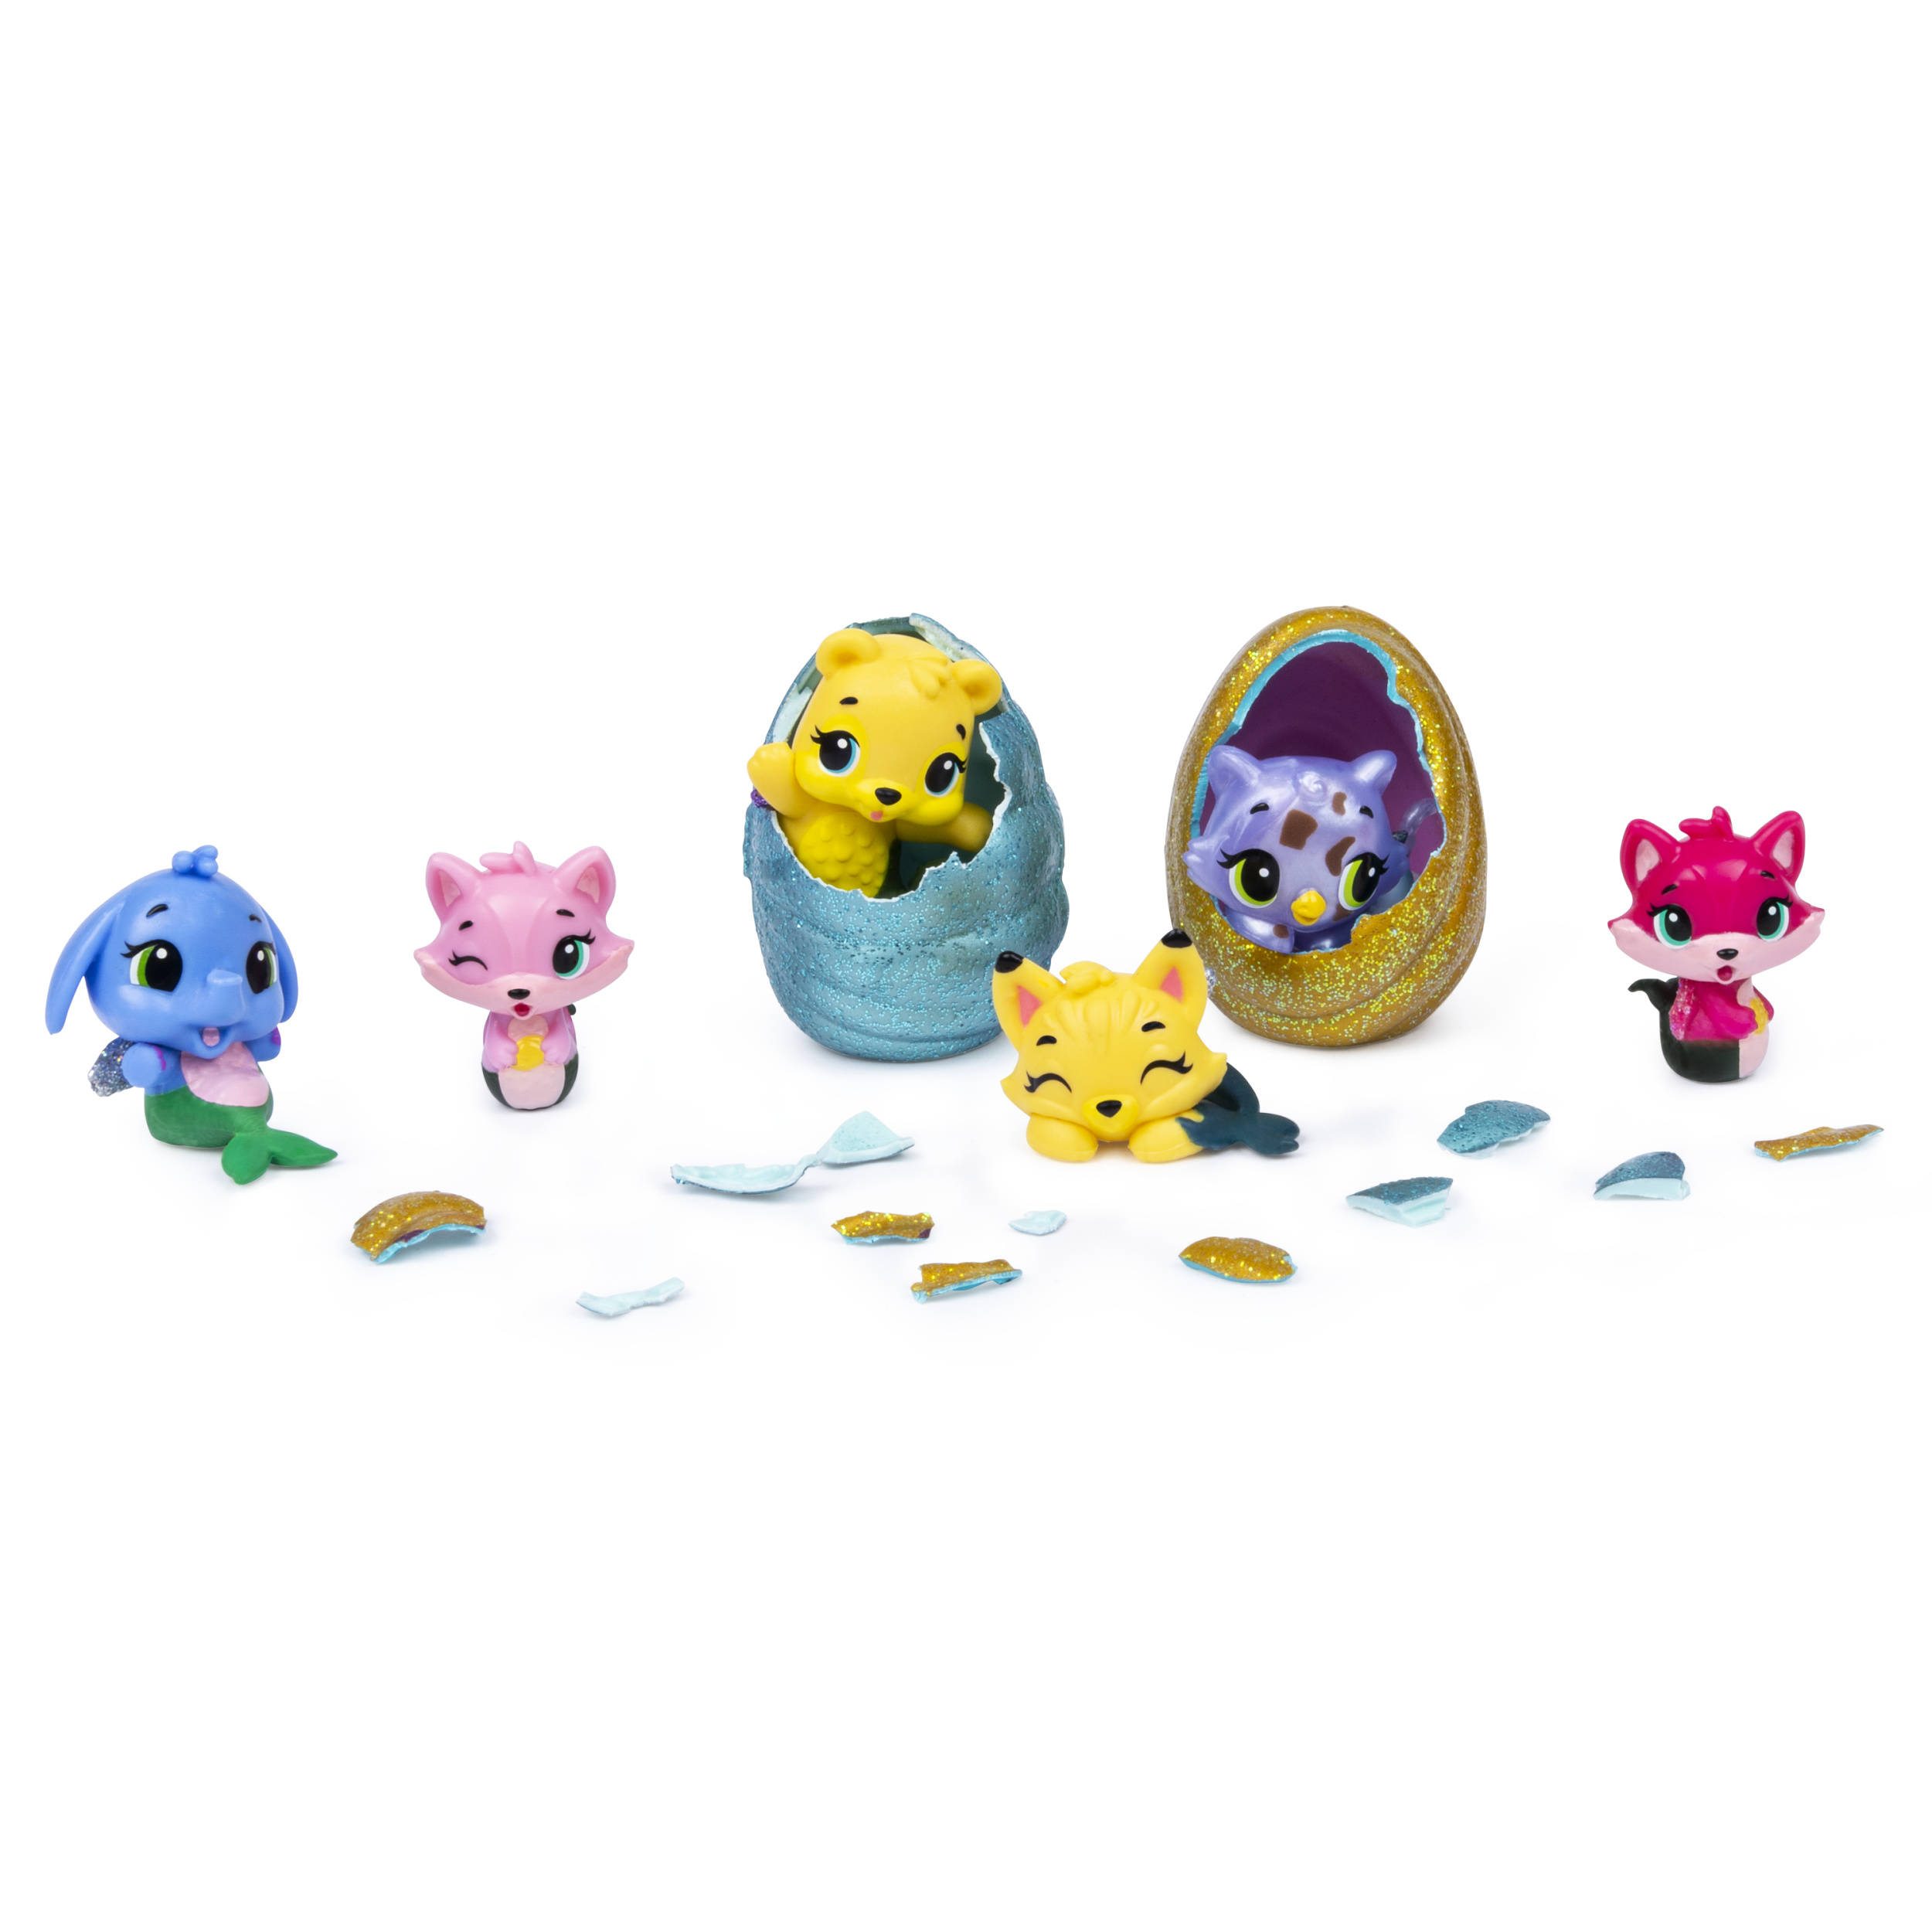 Hatchimals CollEGGtibles, Mermal Magic 4 Pack + Bonus with Season 5 Hatchimals, for Kids Aged 5 and Up (Styles May Vary) - image 2 of 8